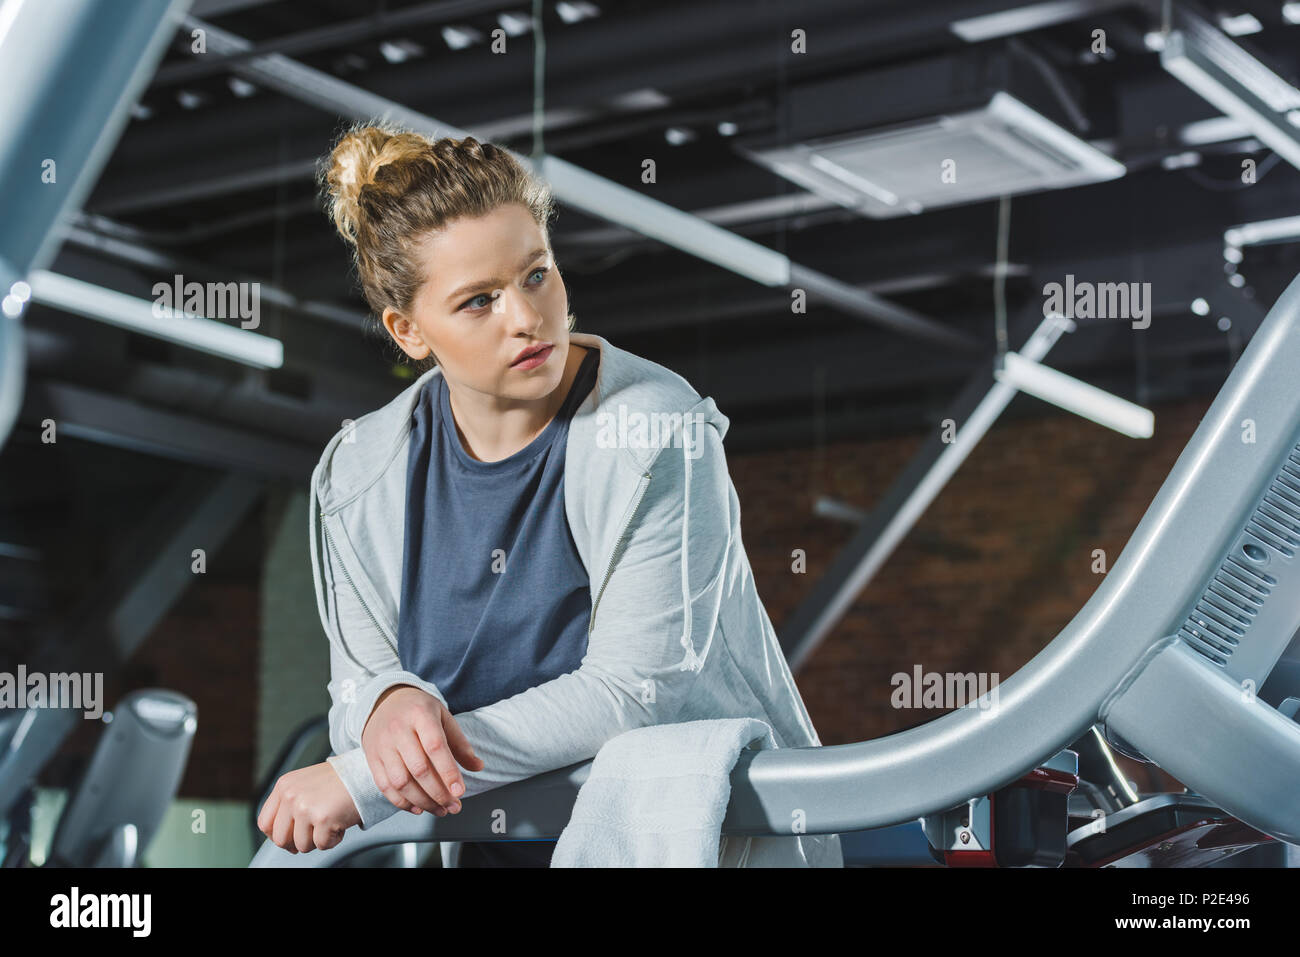 overweight woman leaning on rail of treadmill at gym Stock Photo